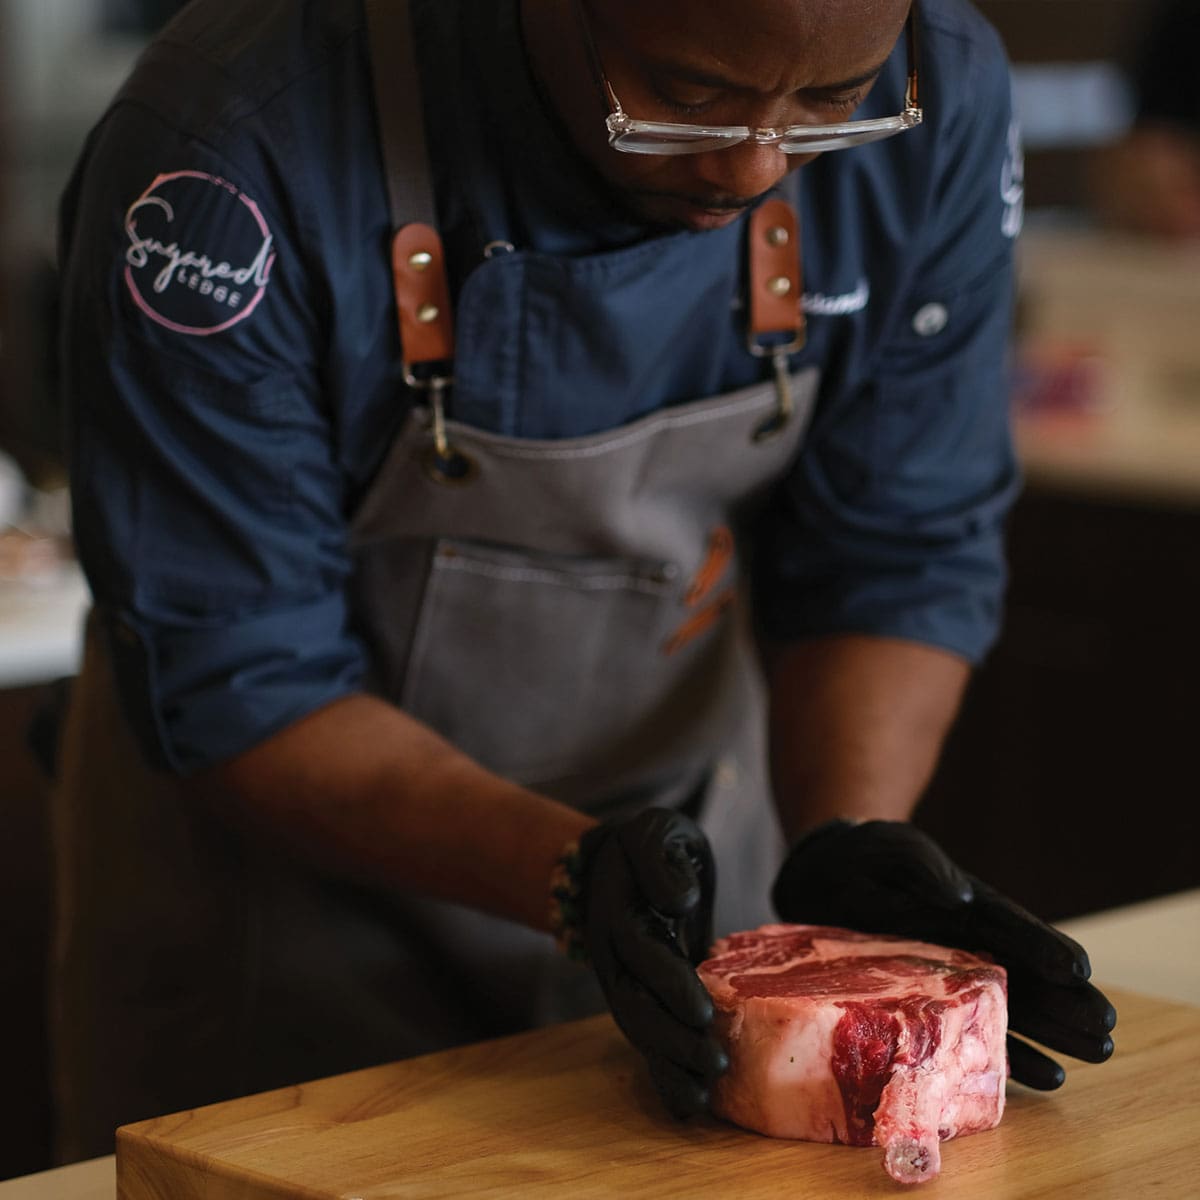 a chef with an apron is holding an uncooked steak.